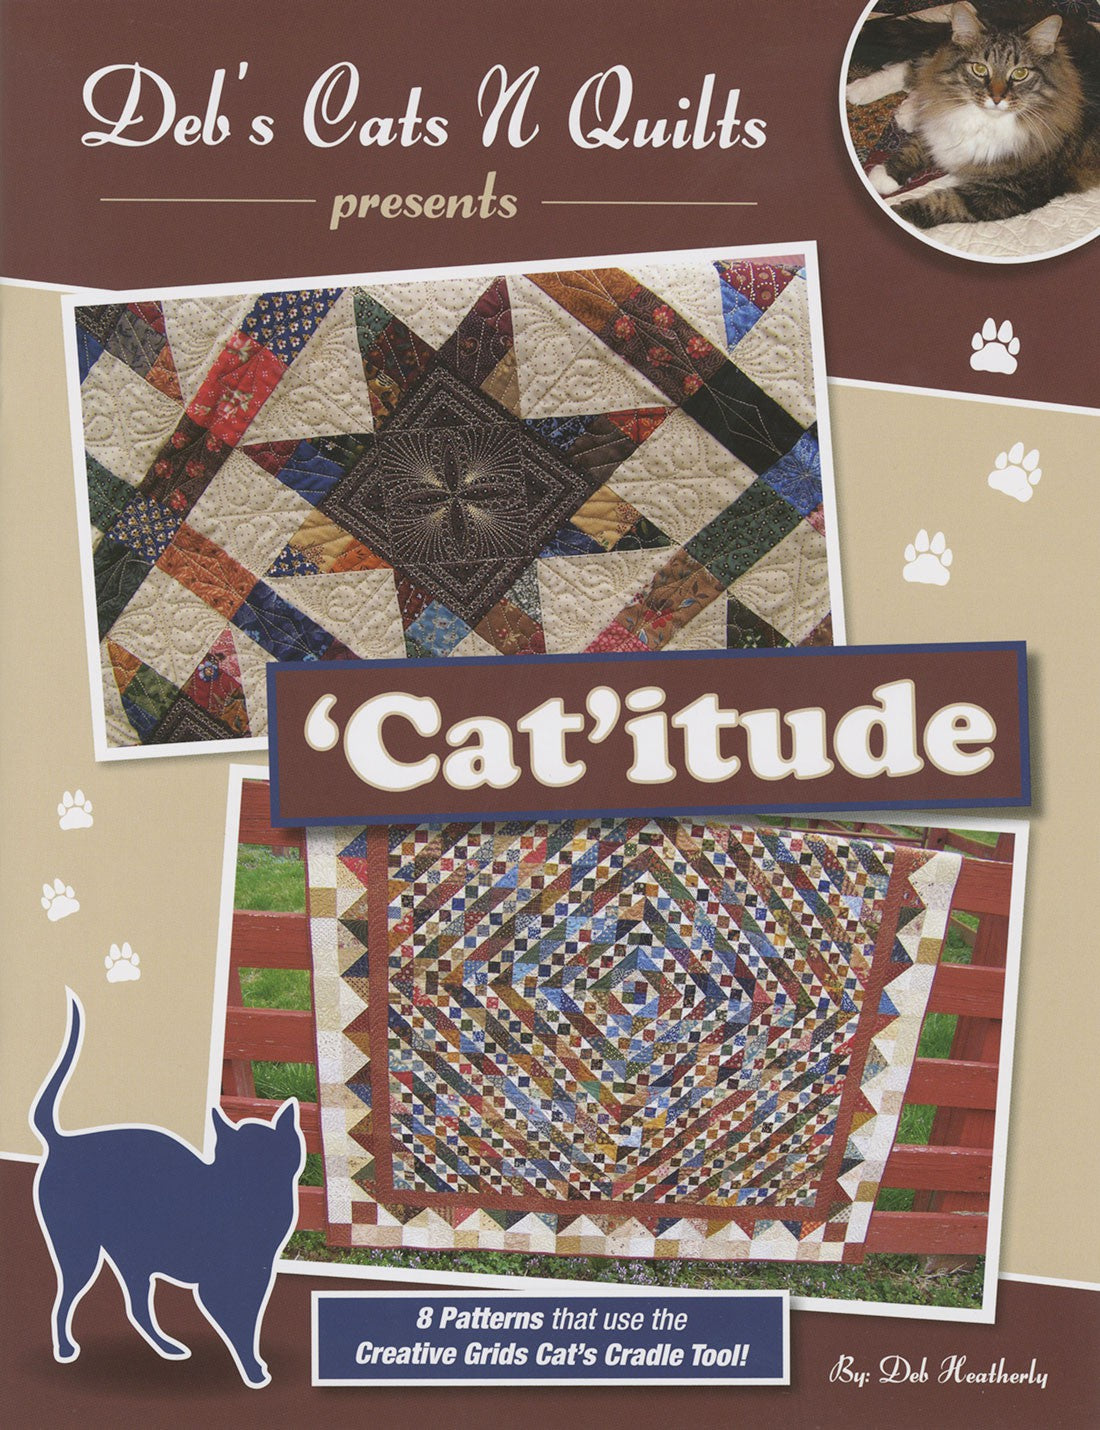 Catitude Quilt Pattern Book by Deb Heatherly of Deb's Cats N Quilts